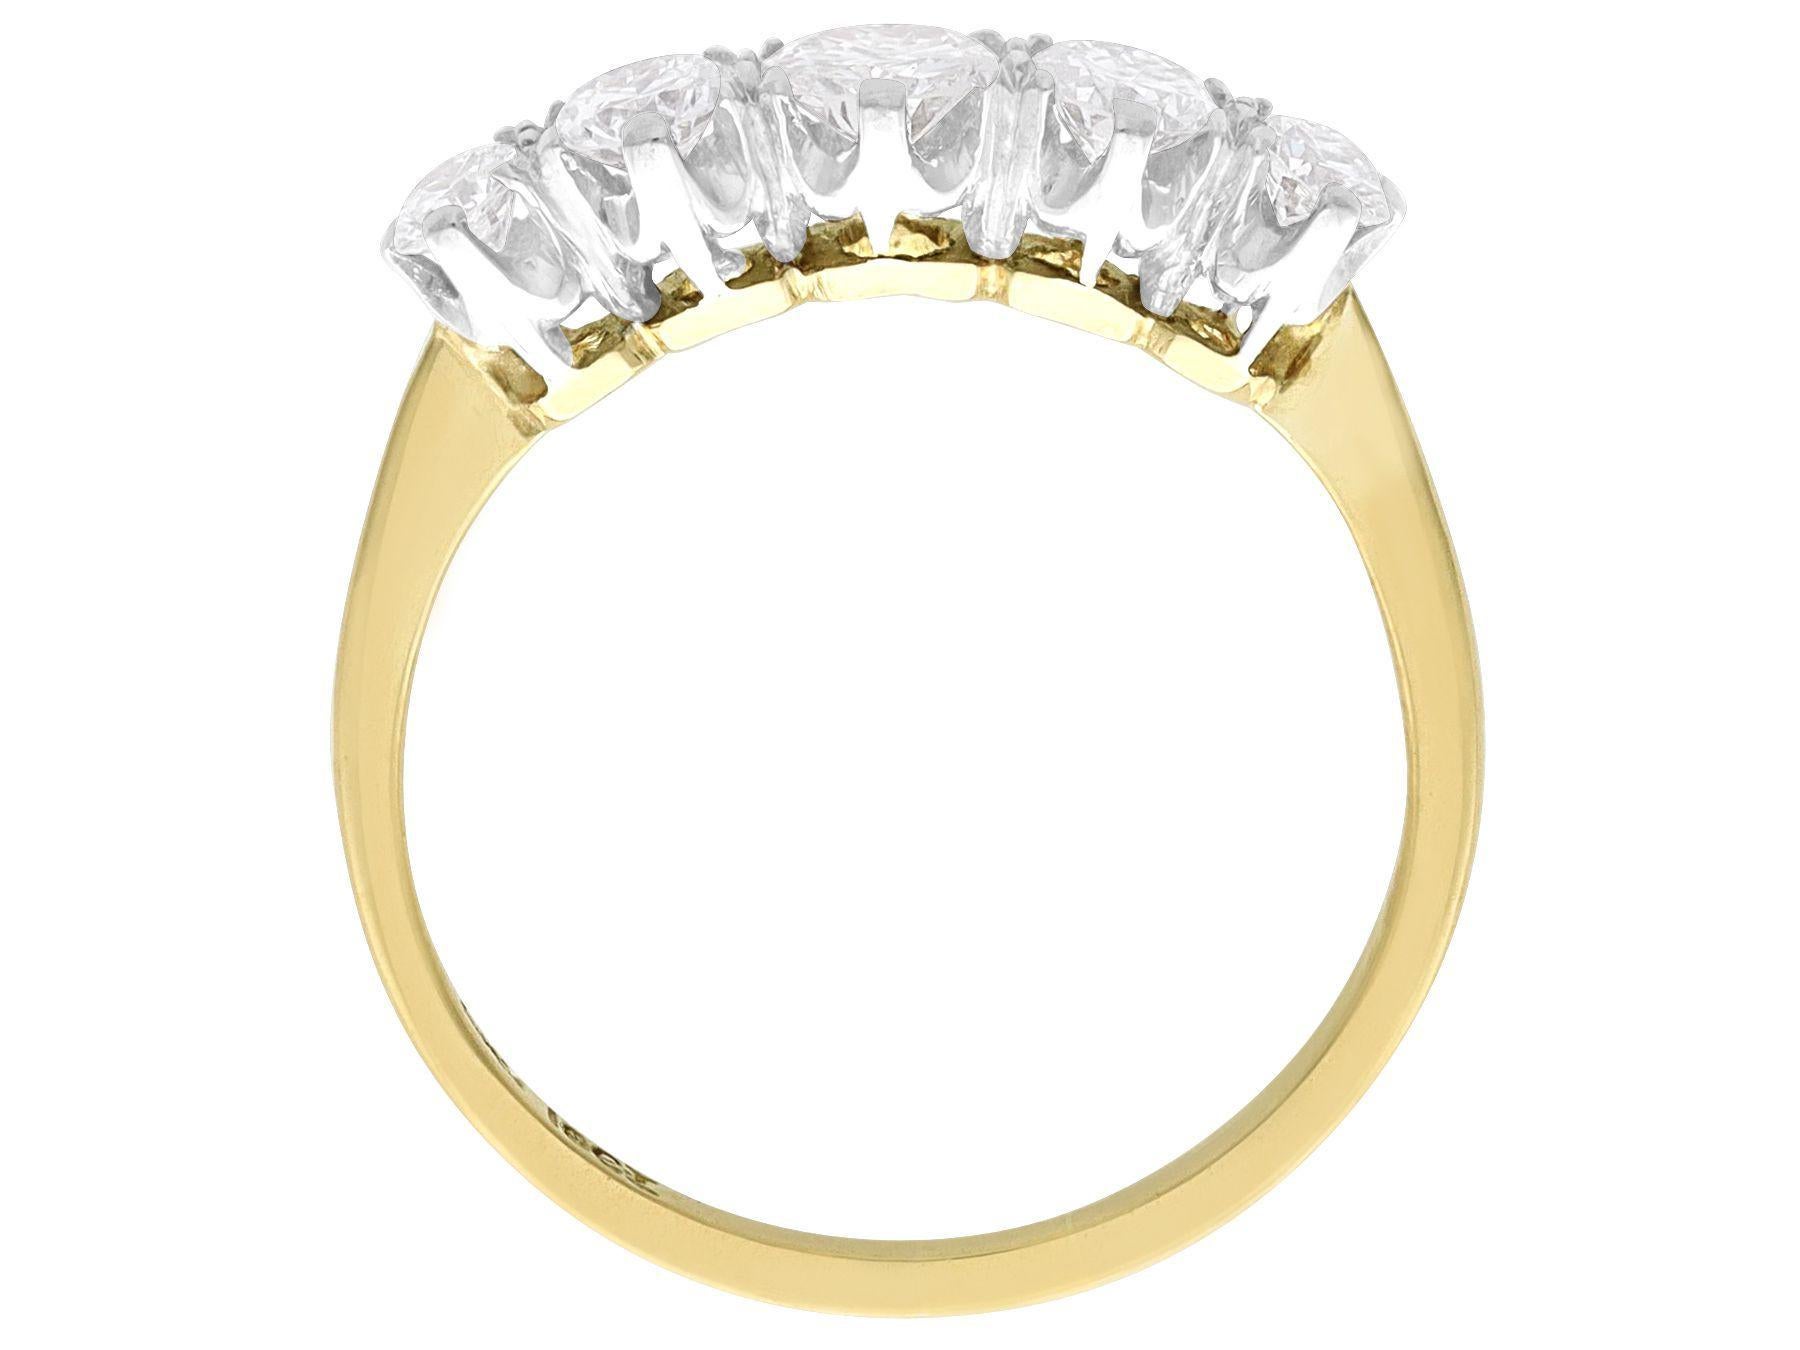 Women's or Men's Antique Diamond and Yellow Gold Five Stone Ring